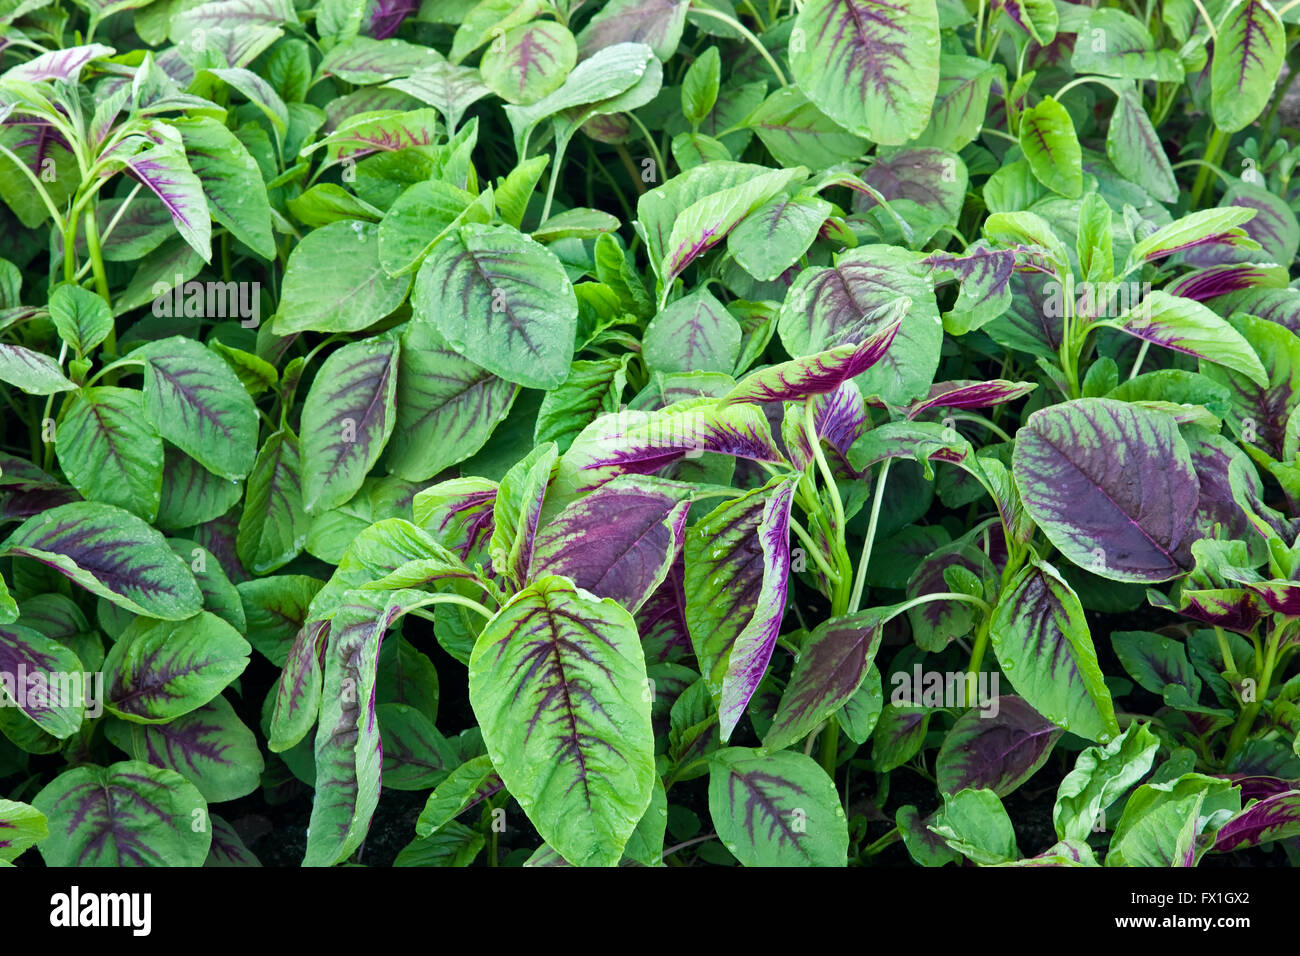 Jan choi, Chinese spinach growing in greenhouse. Stock Photo